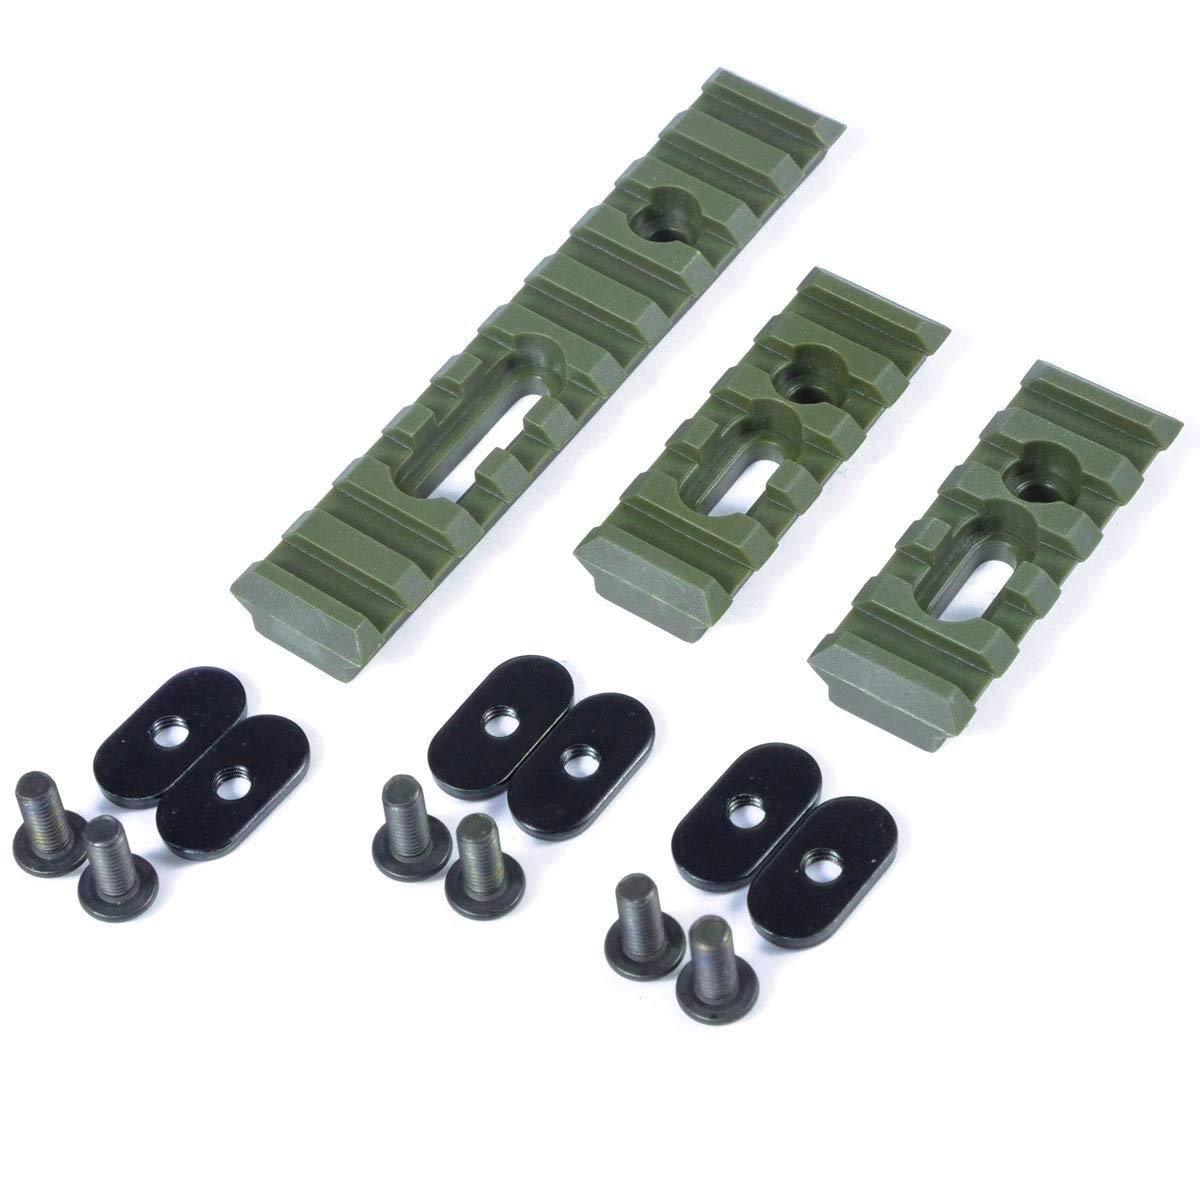 Olive Drab Green Slotted Polymer Picatinny Rail Set for Handguards Rails Green Blob Outdoors 